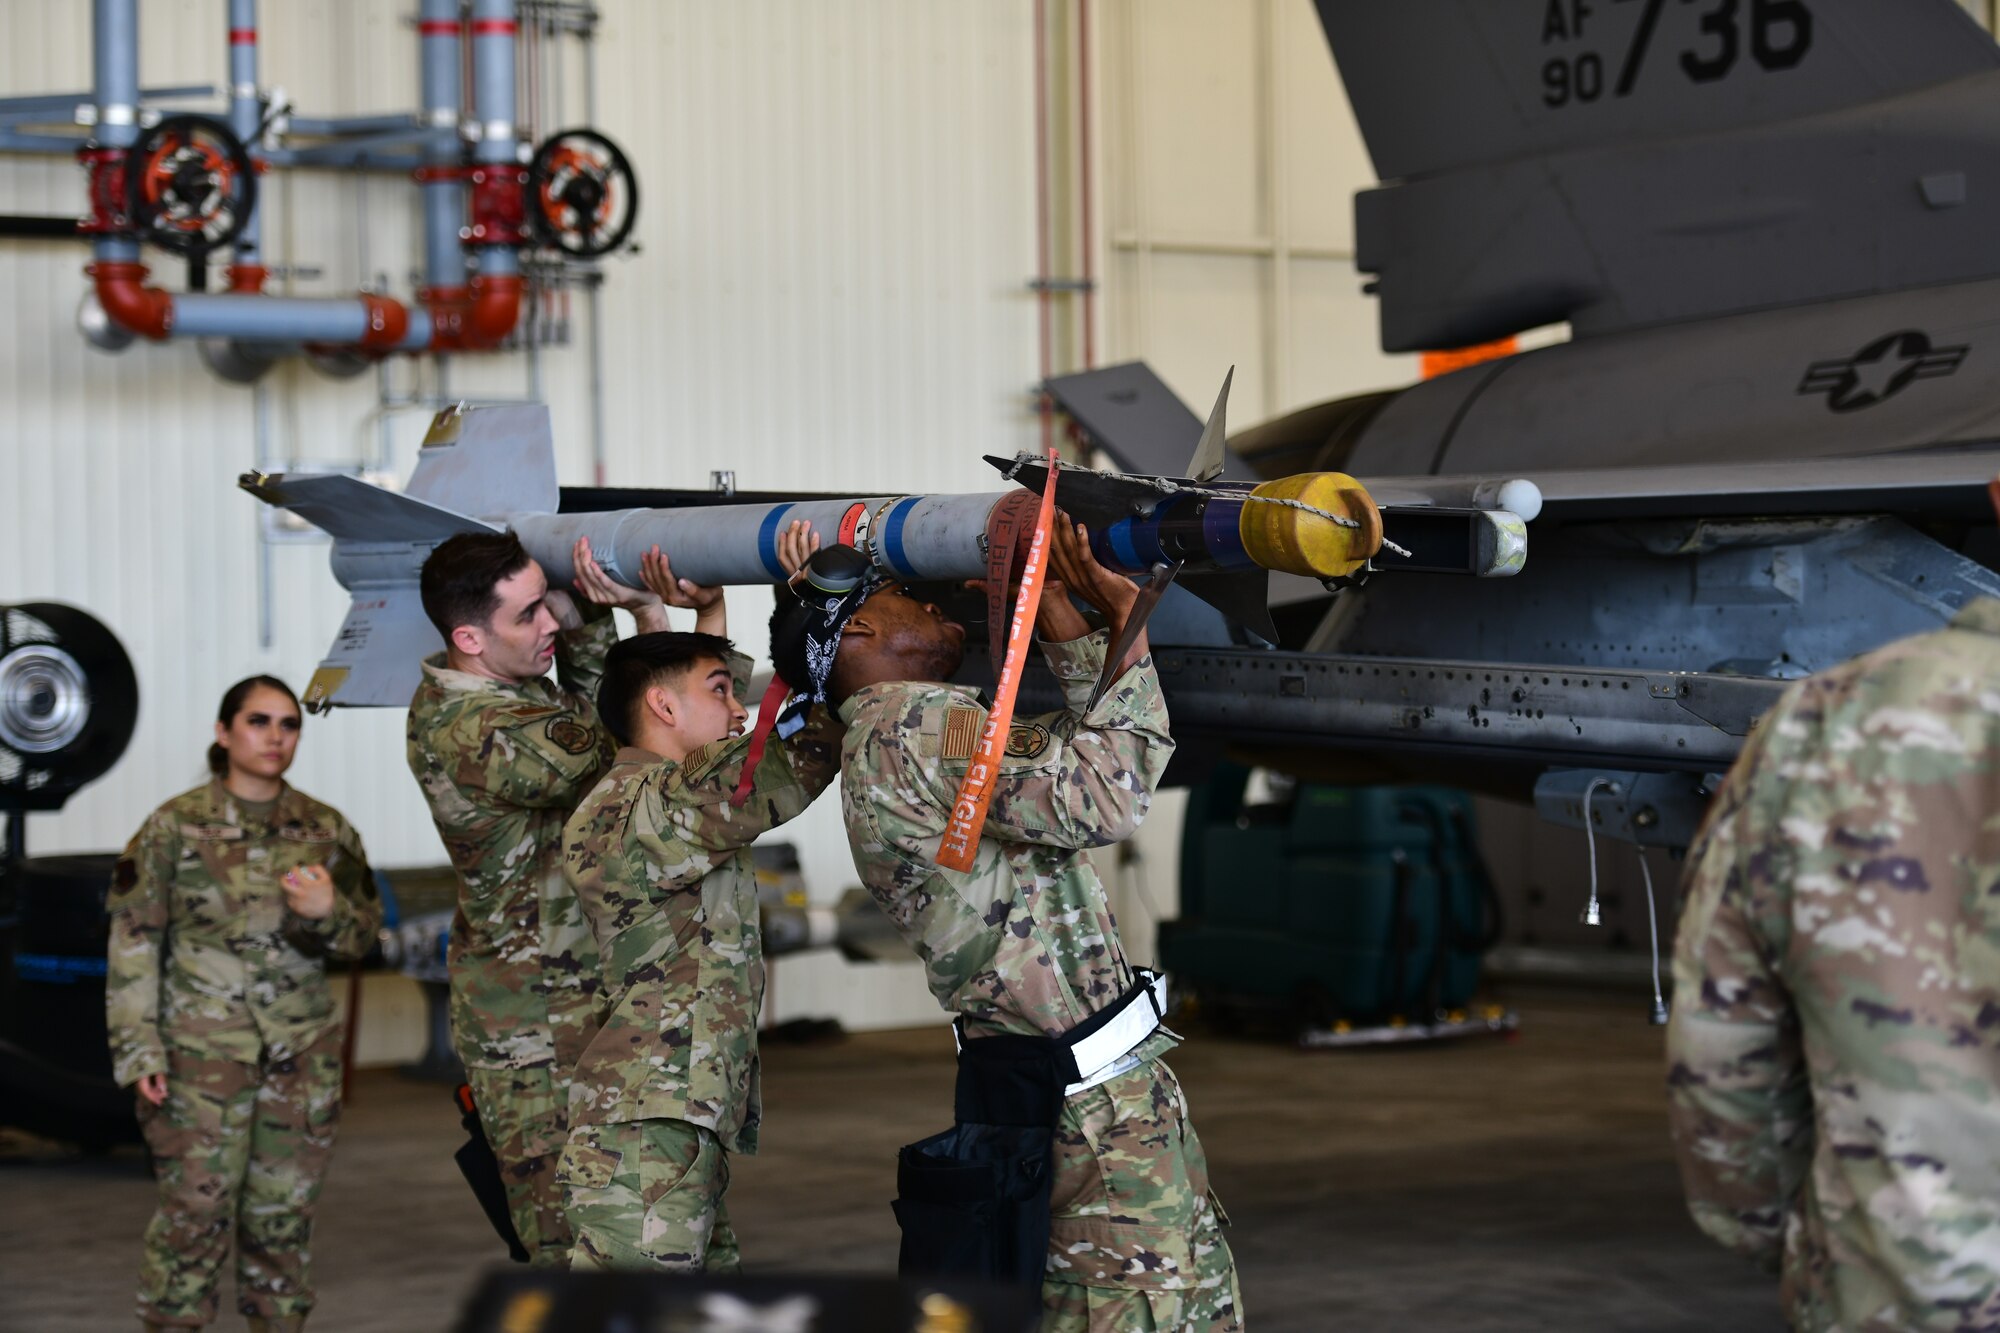 Airmen lifting a missile.